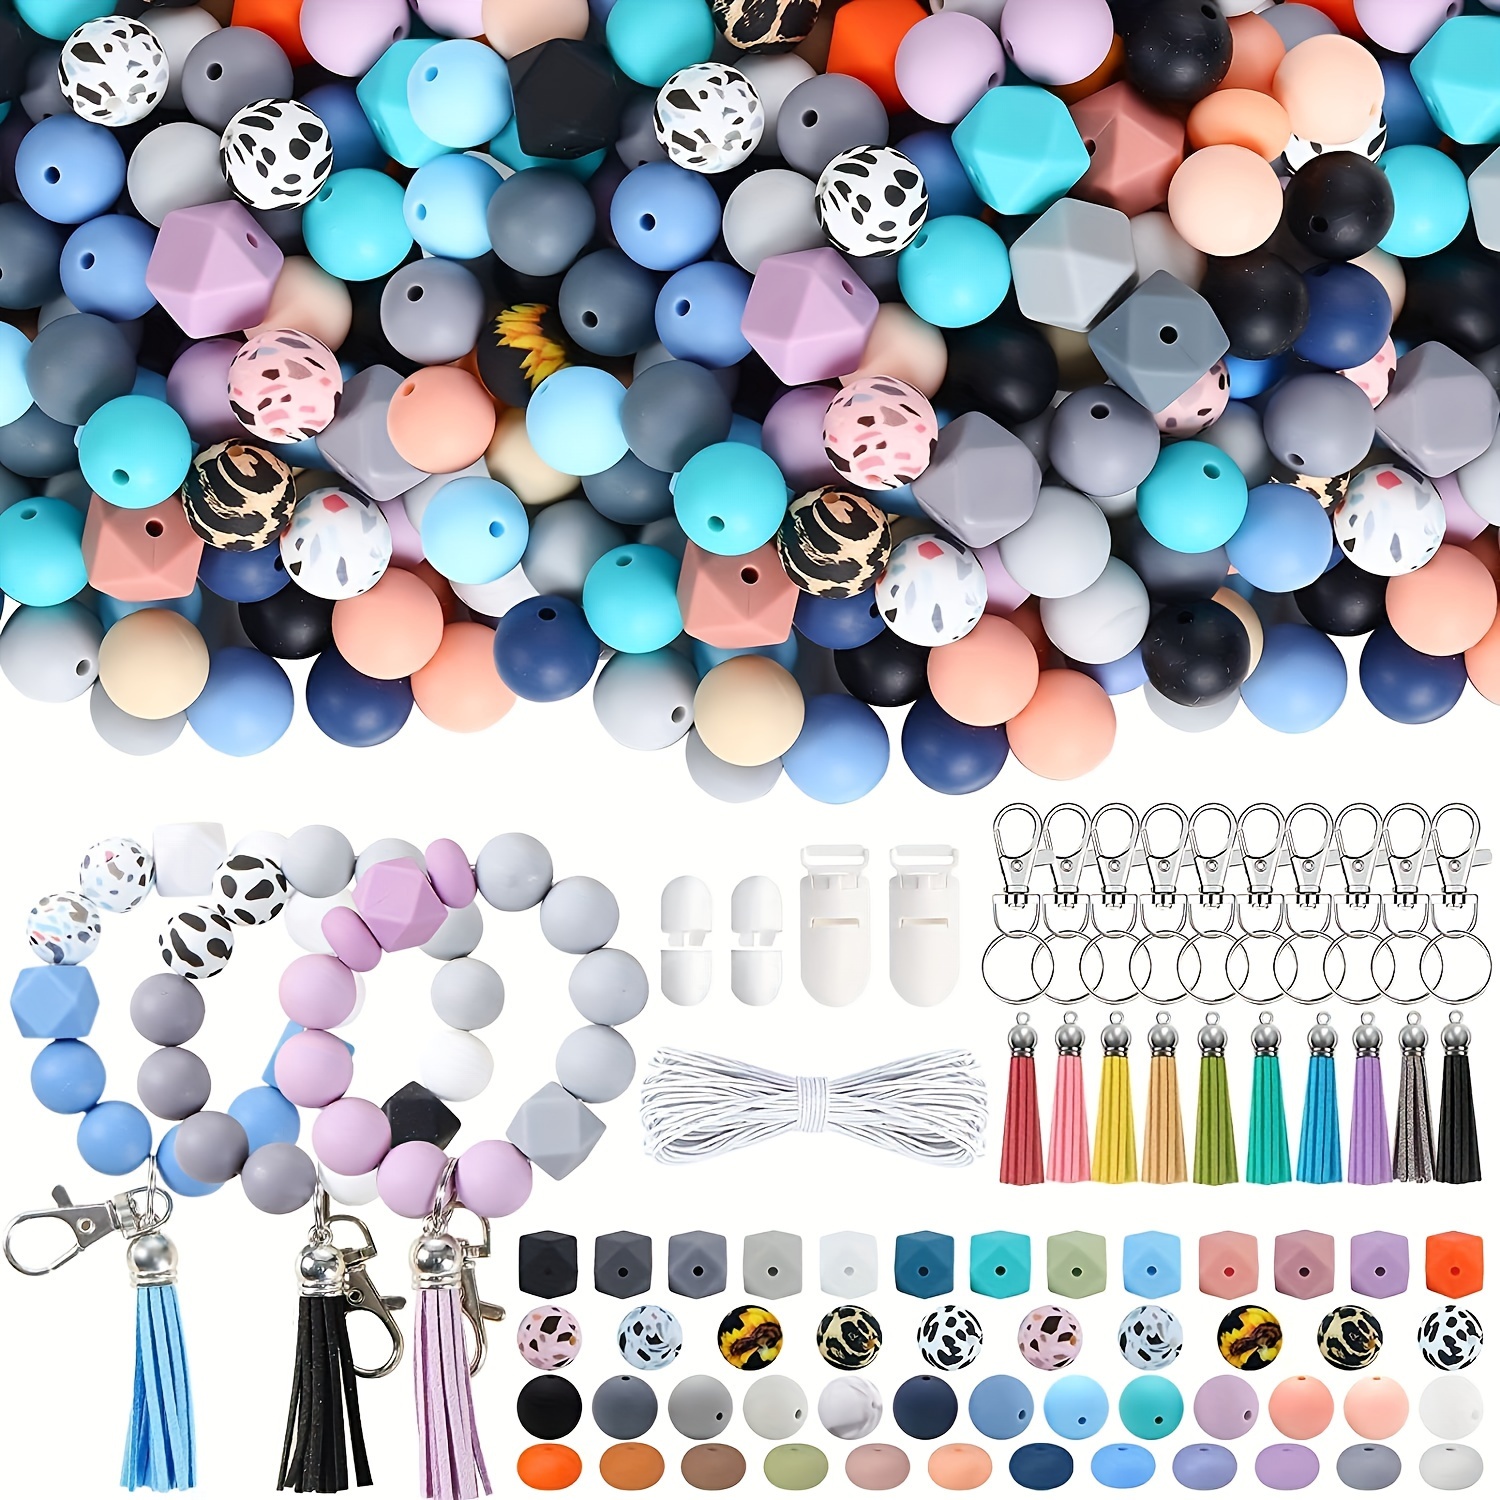 59PCS Silicone Beads, Mixed Beads for Keychian Making Craft Set Jewelry,  12mm Rubber Beads, 15mm Colorful Round Silicone Beads Bulk Assorted Beads